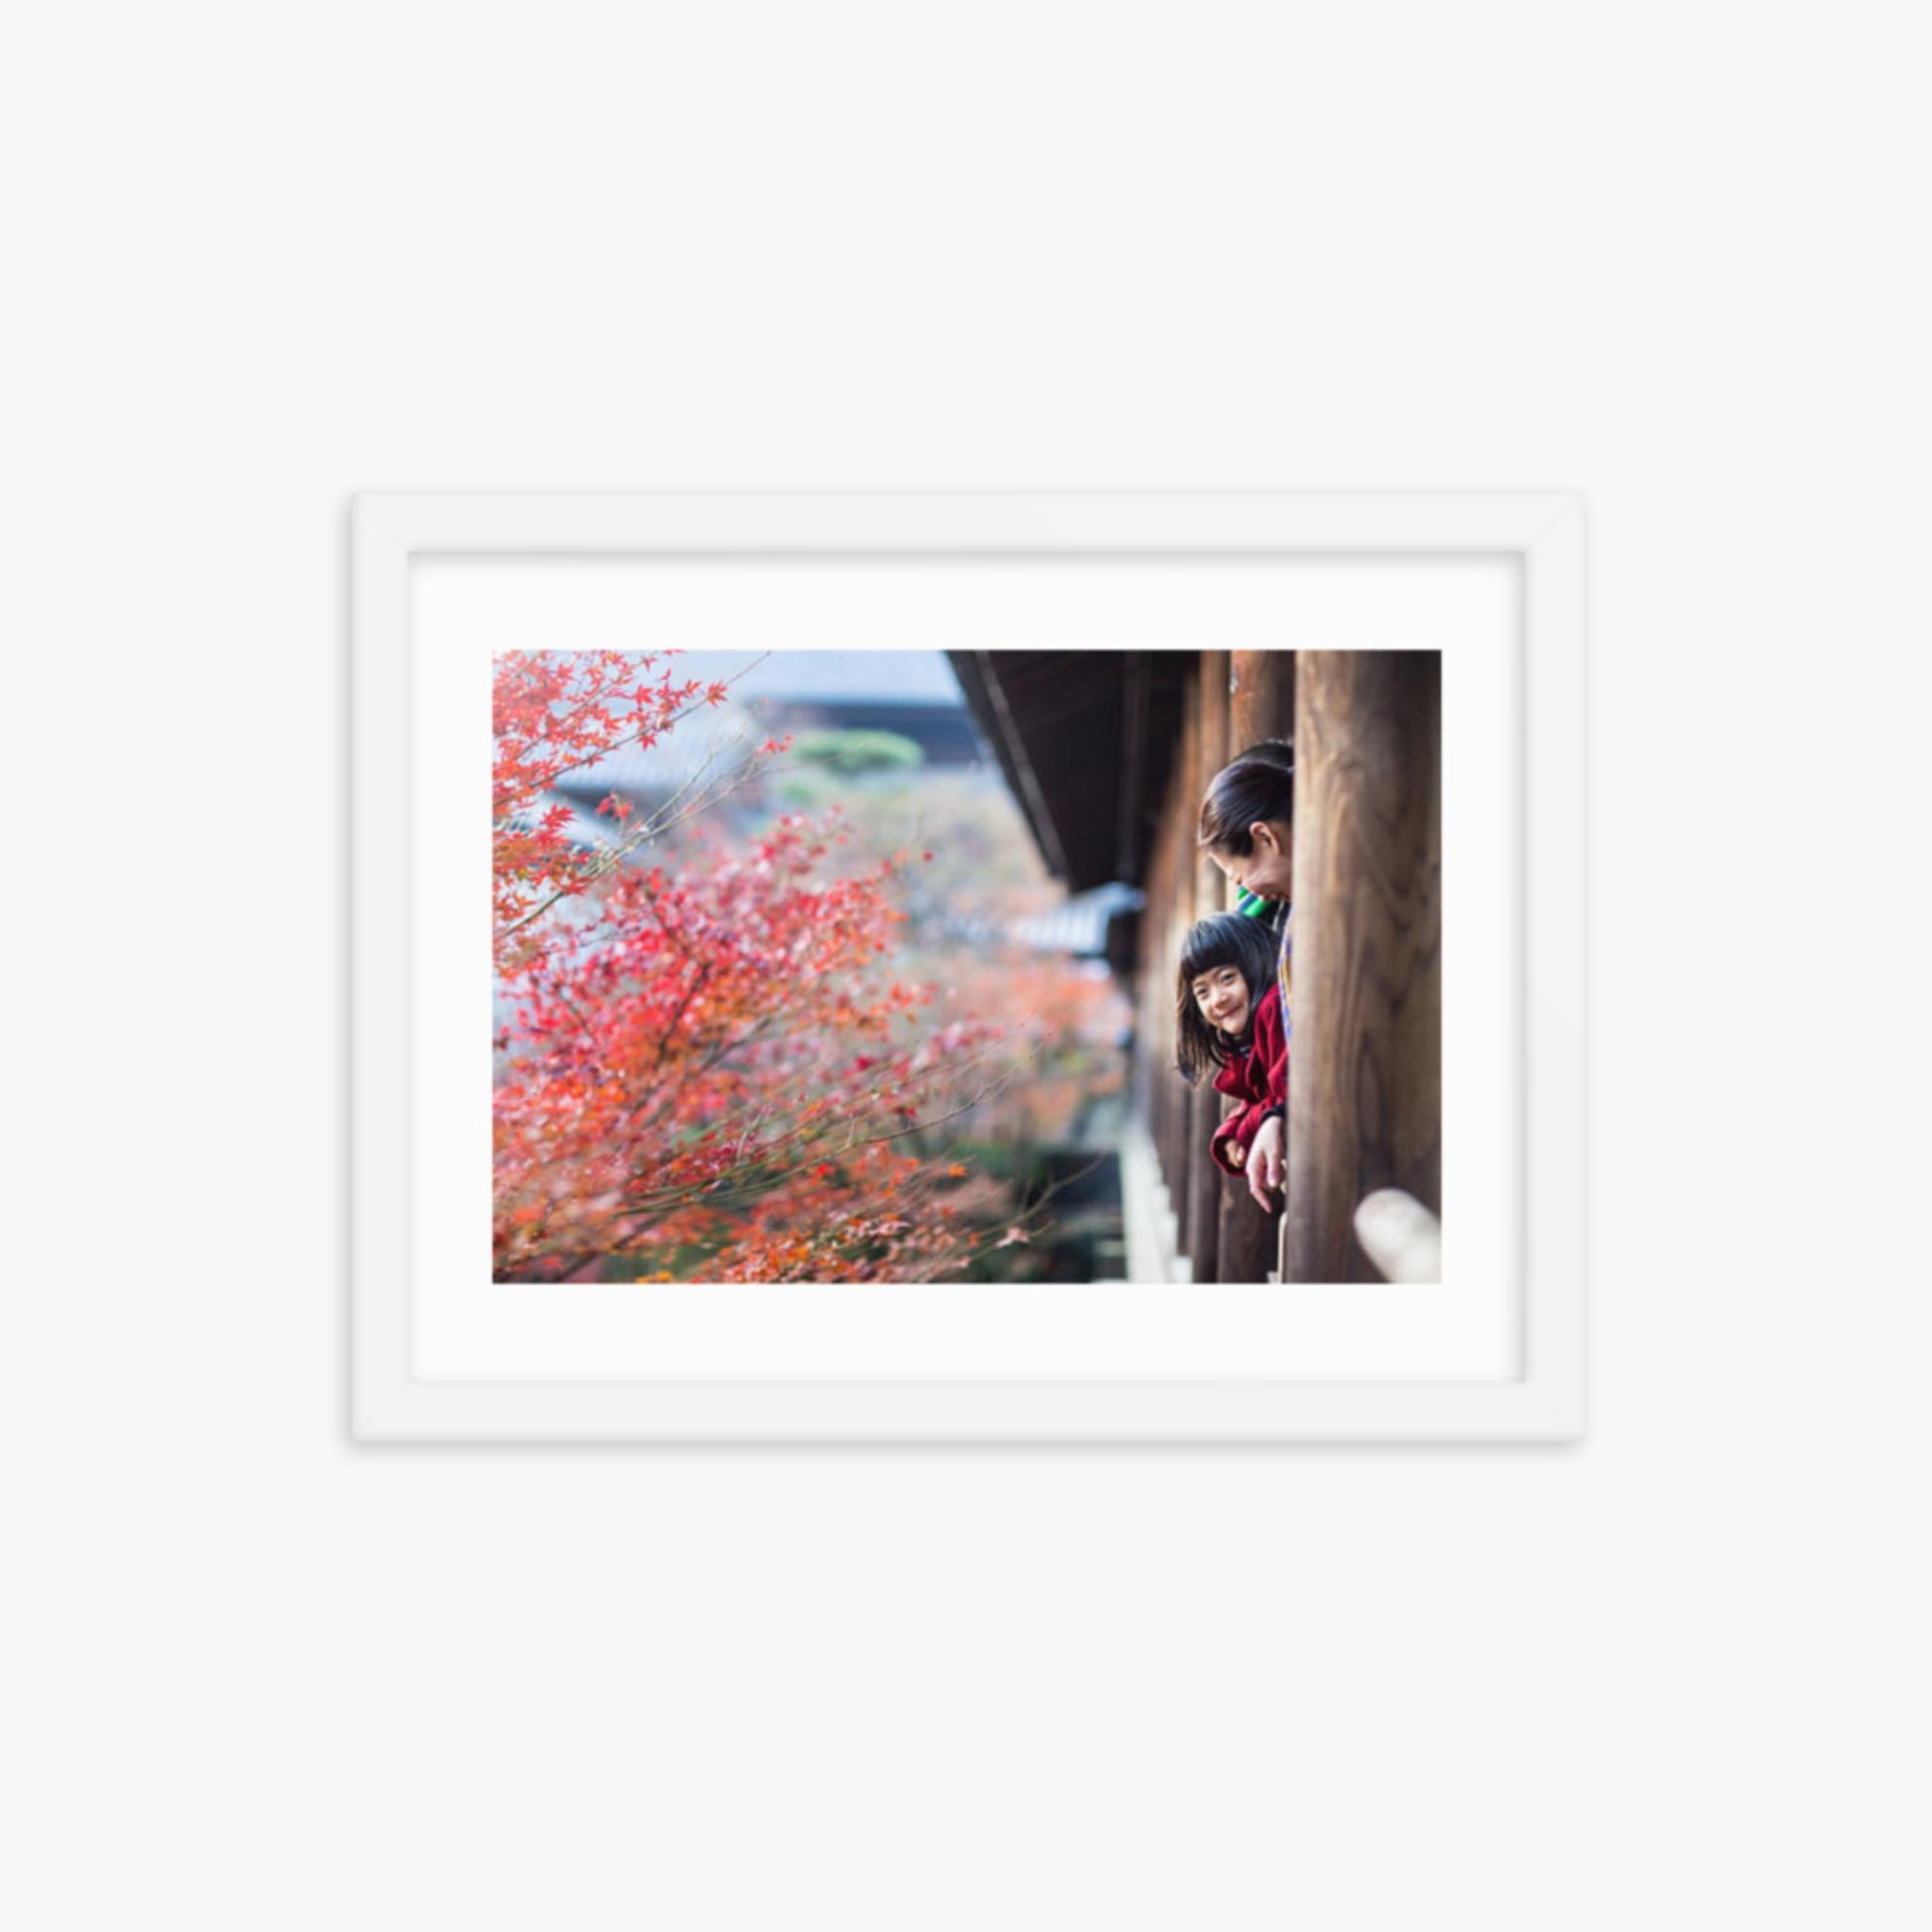 Father, mother and daughter at a temple enjoying autumn leaves 12x16 in Poster With White Frame